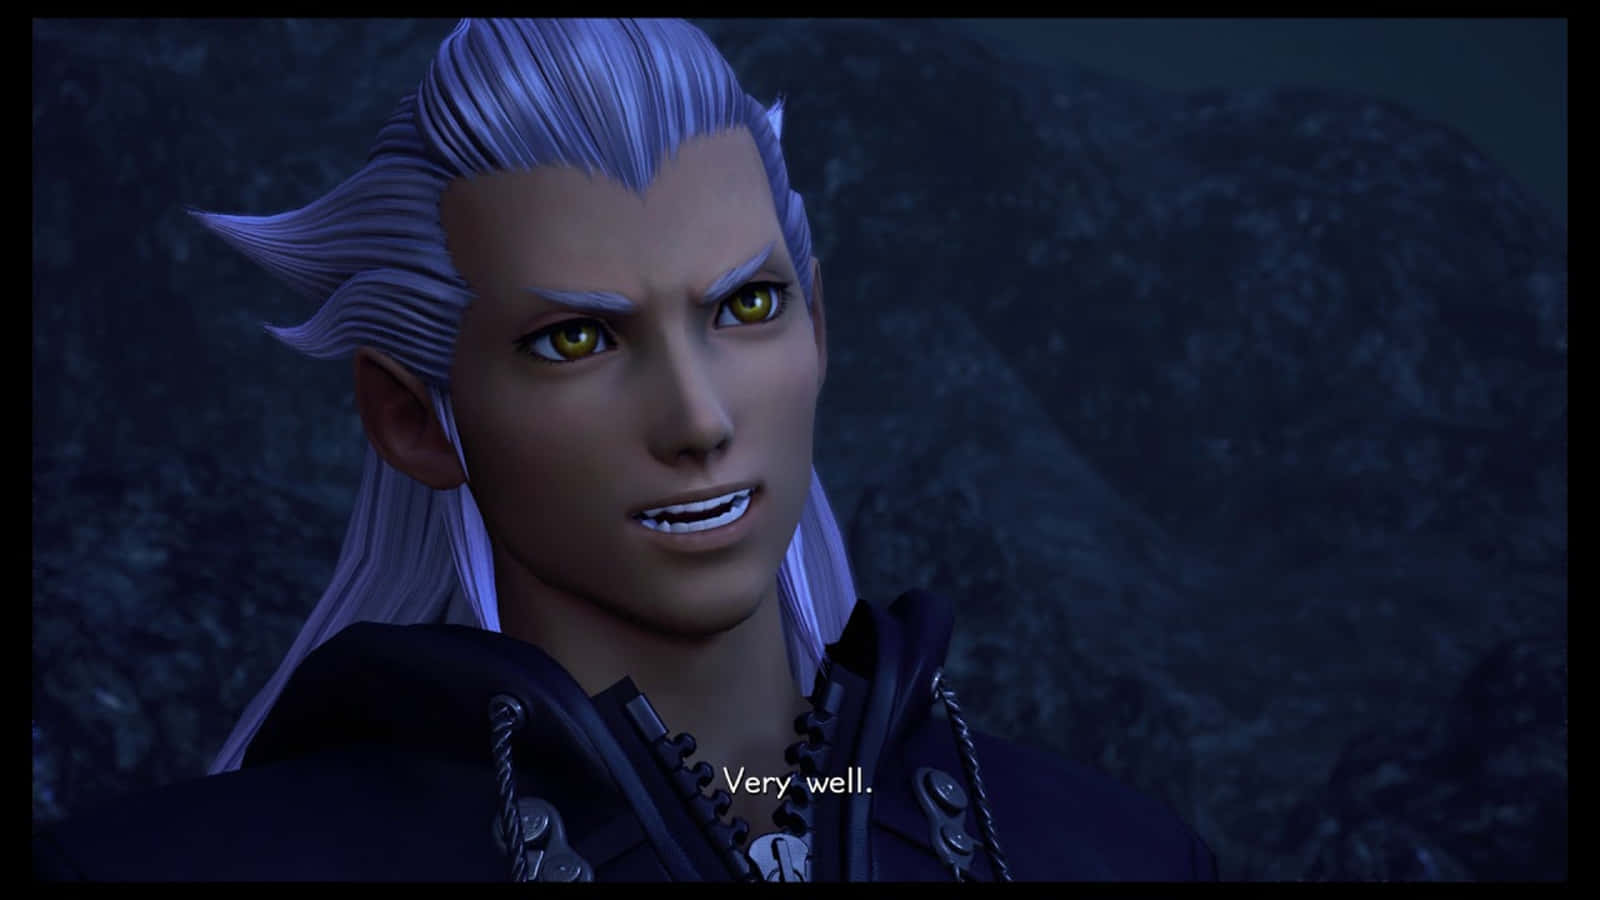 Ansem, Seeker of Darkness, in a thrilling action pose Wallpaper